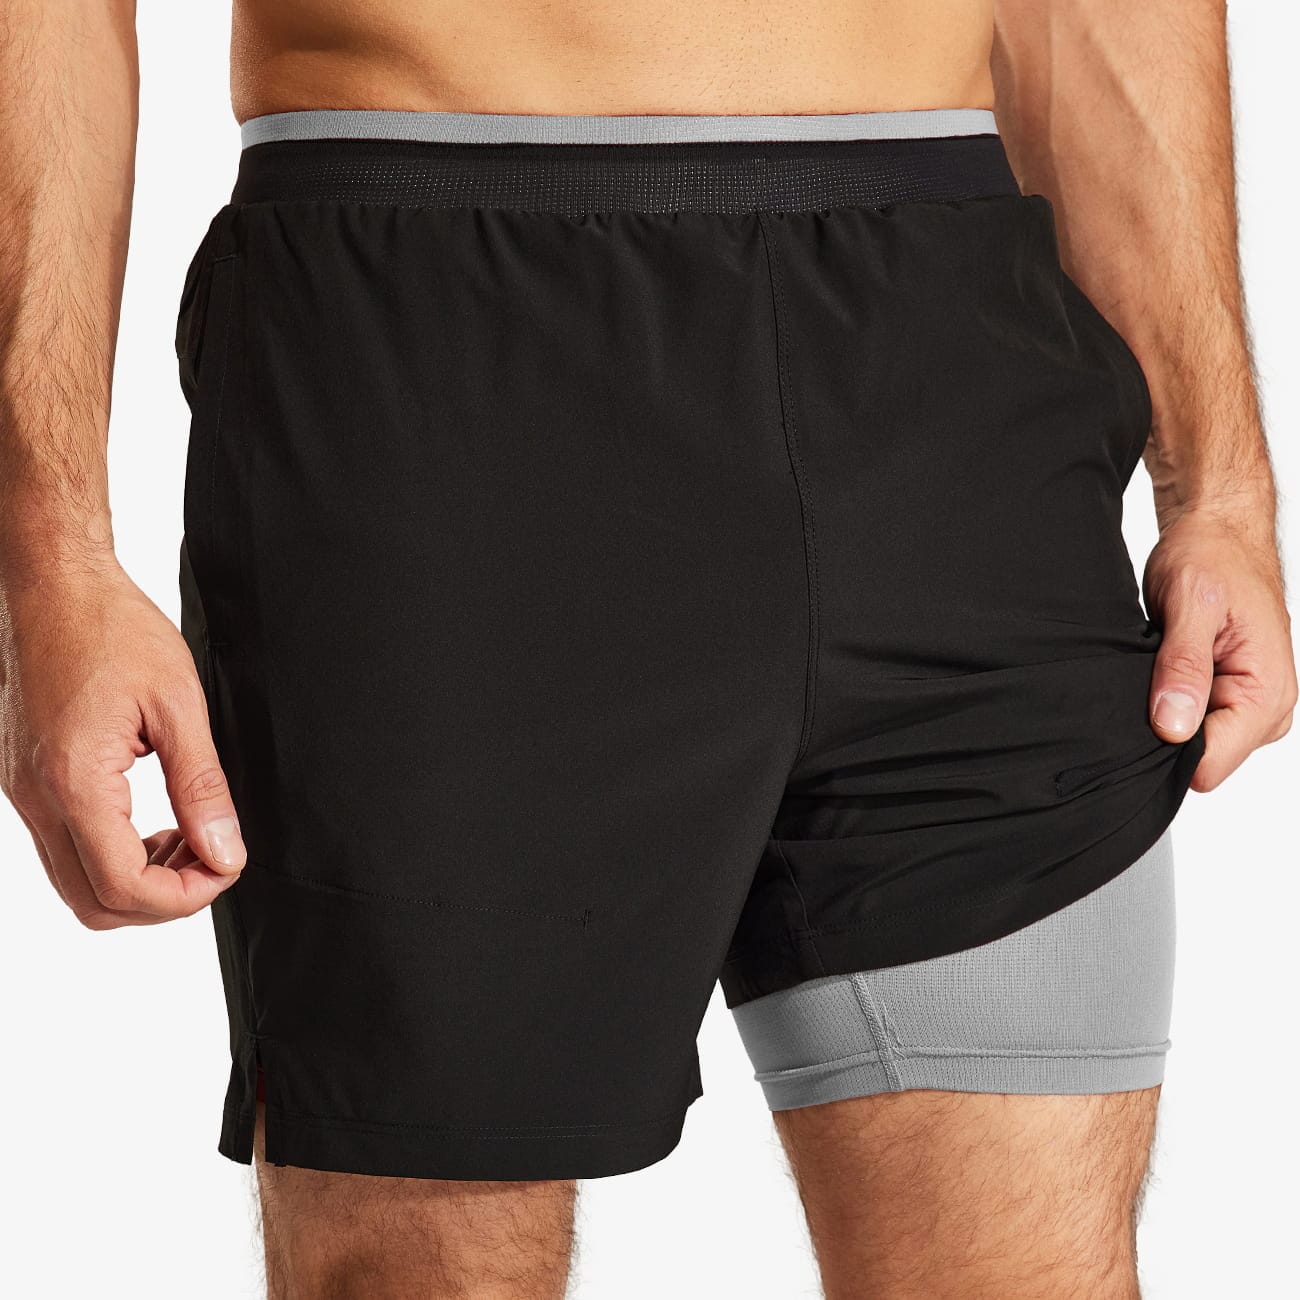 Men's 2 in 1 Running Shorts with Liner 5 Quick Dry Athletic Shorts - Black  Grey / S